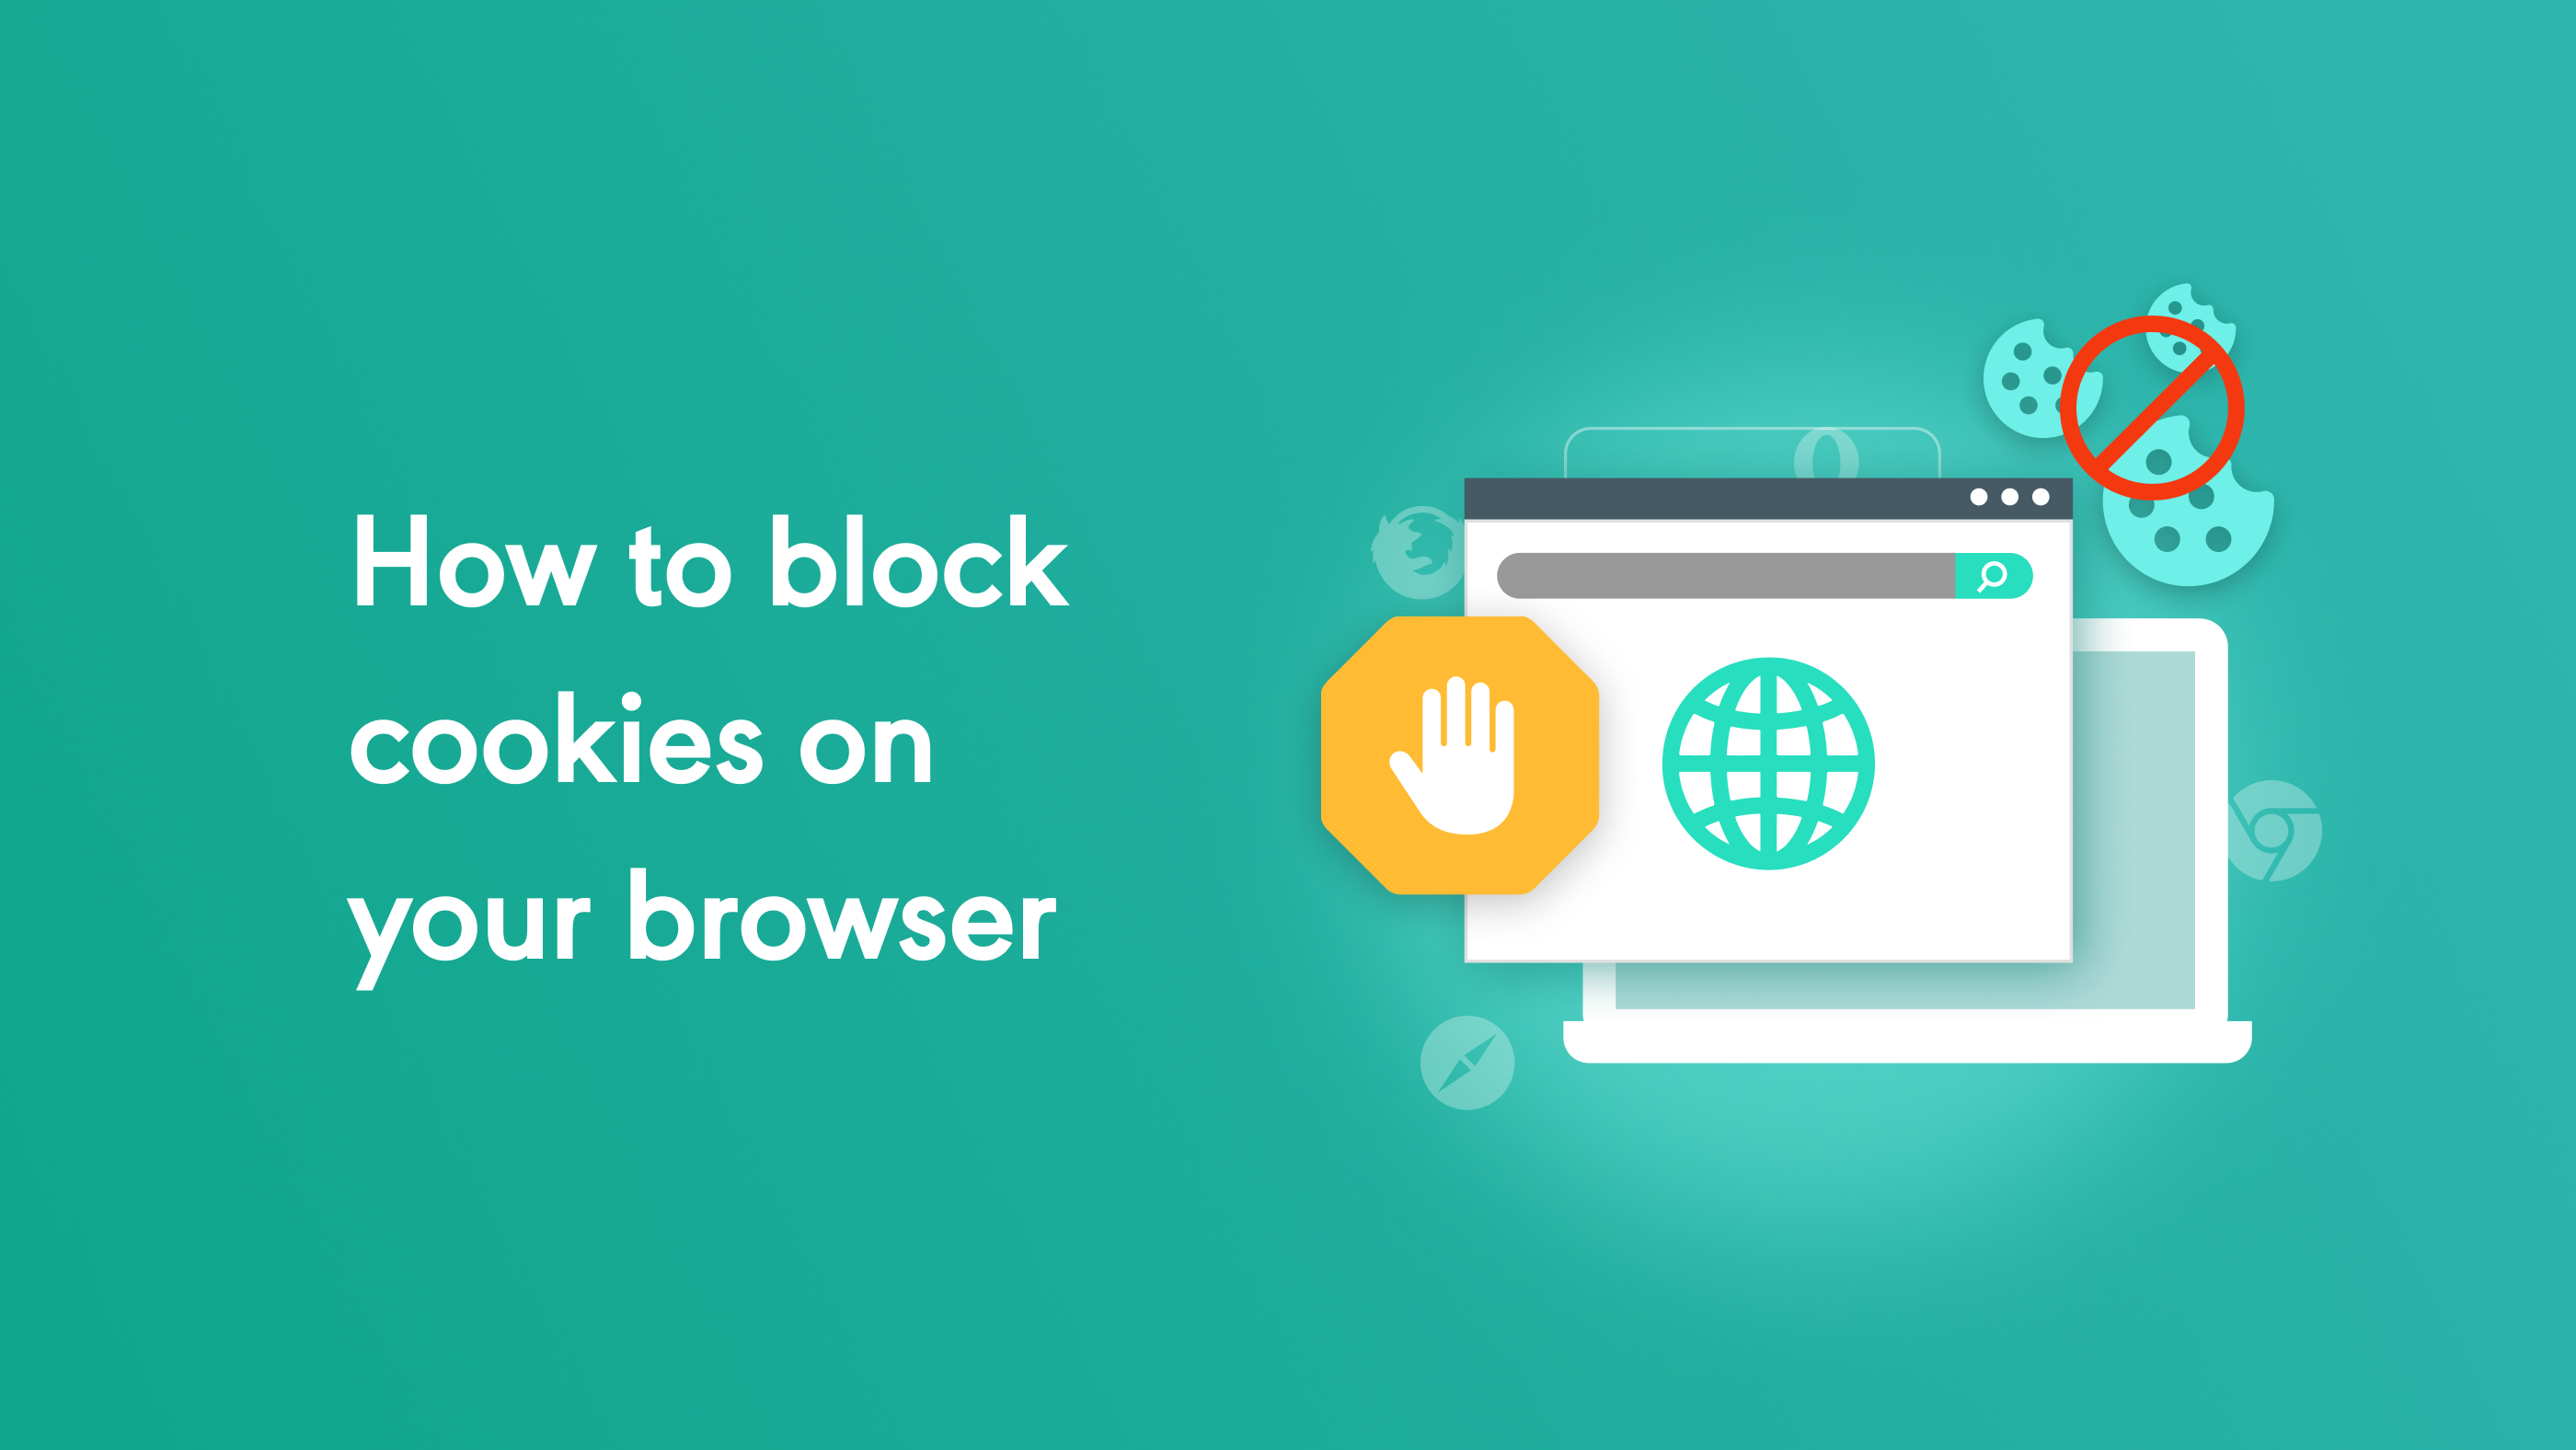 How to Block Cookies on Your Browser